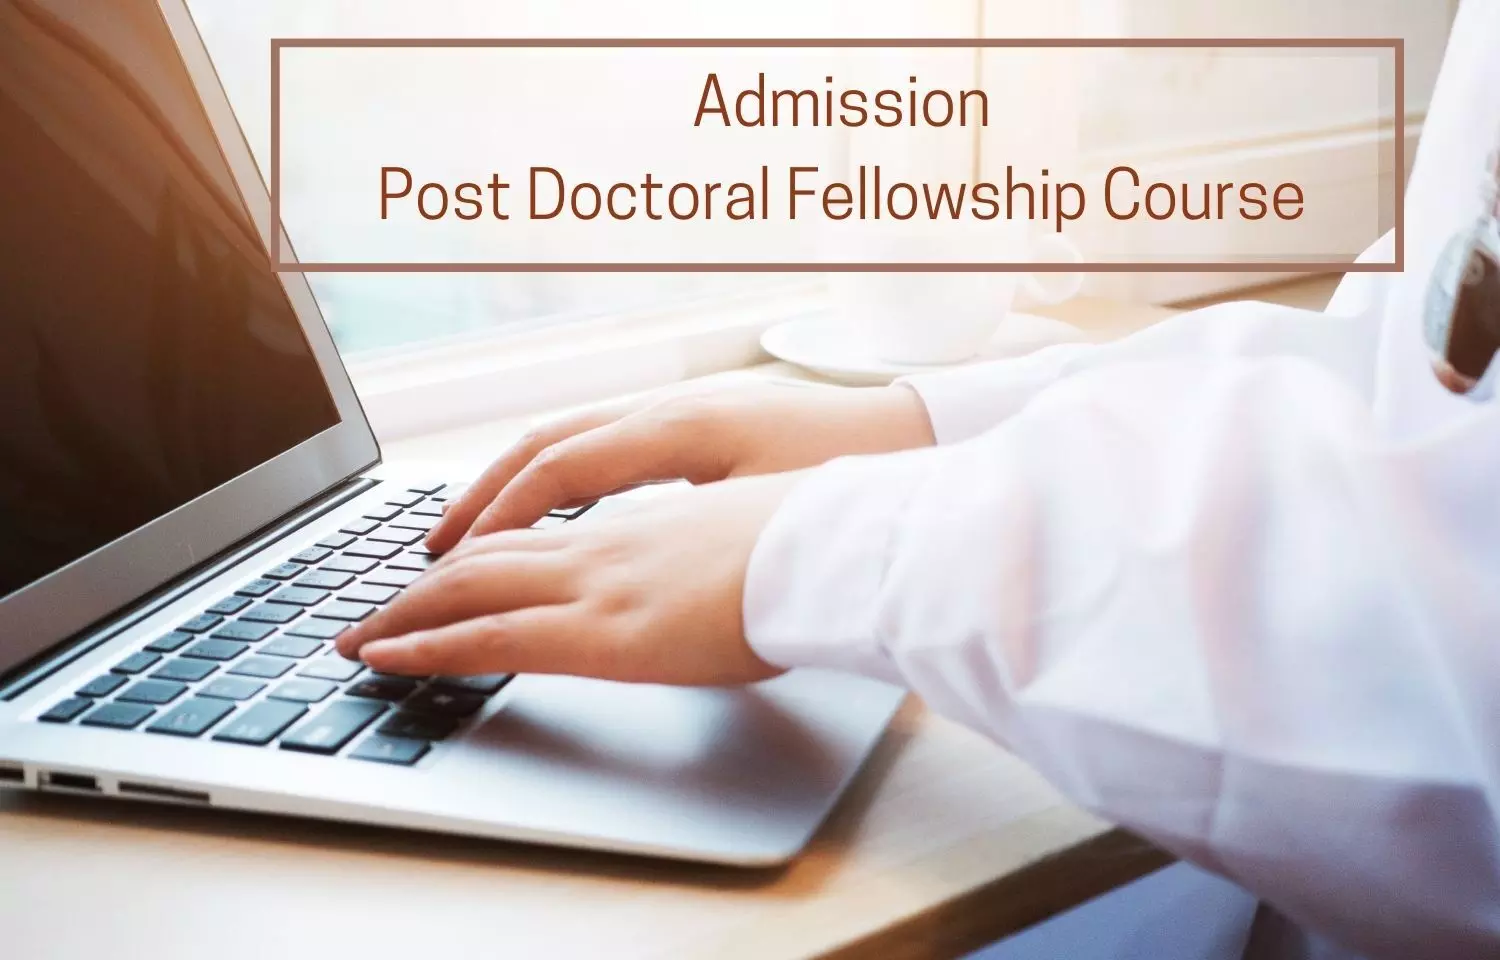 TN Health Invites Applications For Post Doctoral Fellowship In Minimal Access Surgery, Check Out All Admission Details